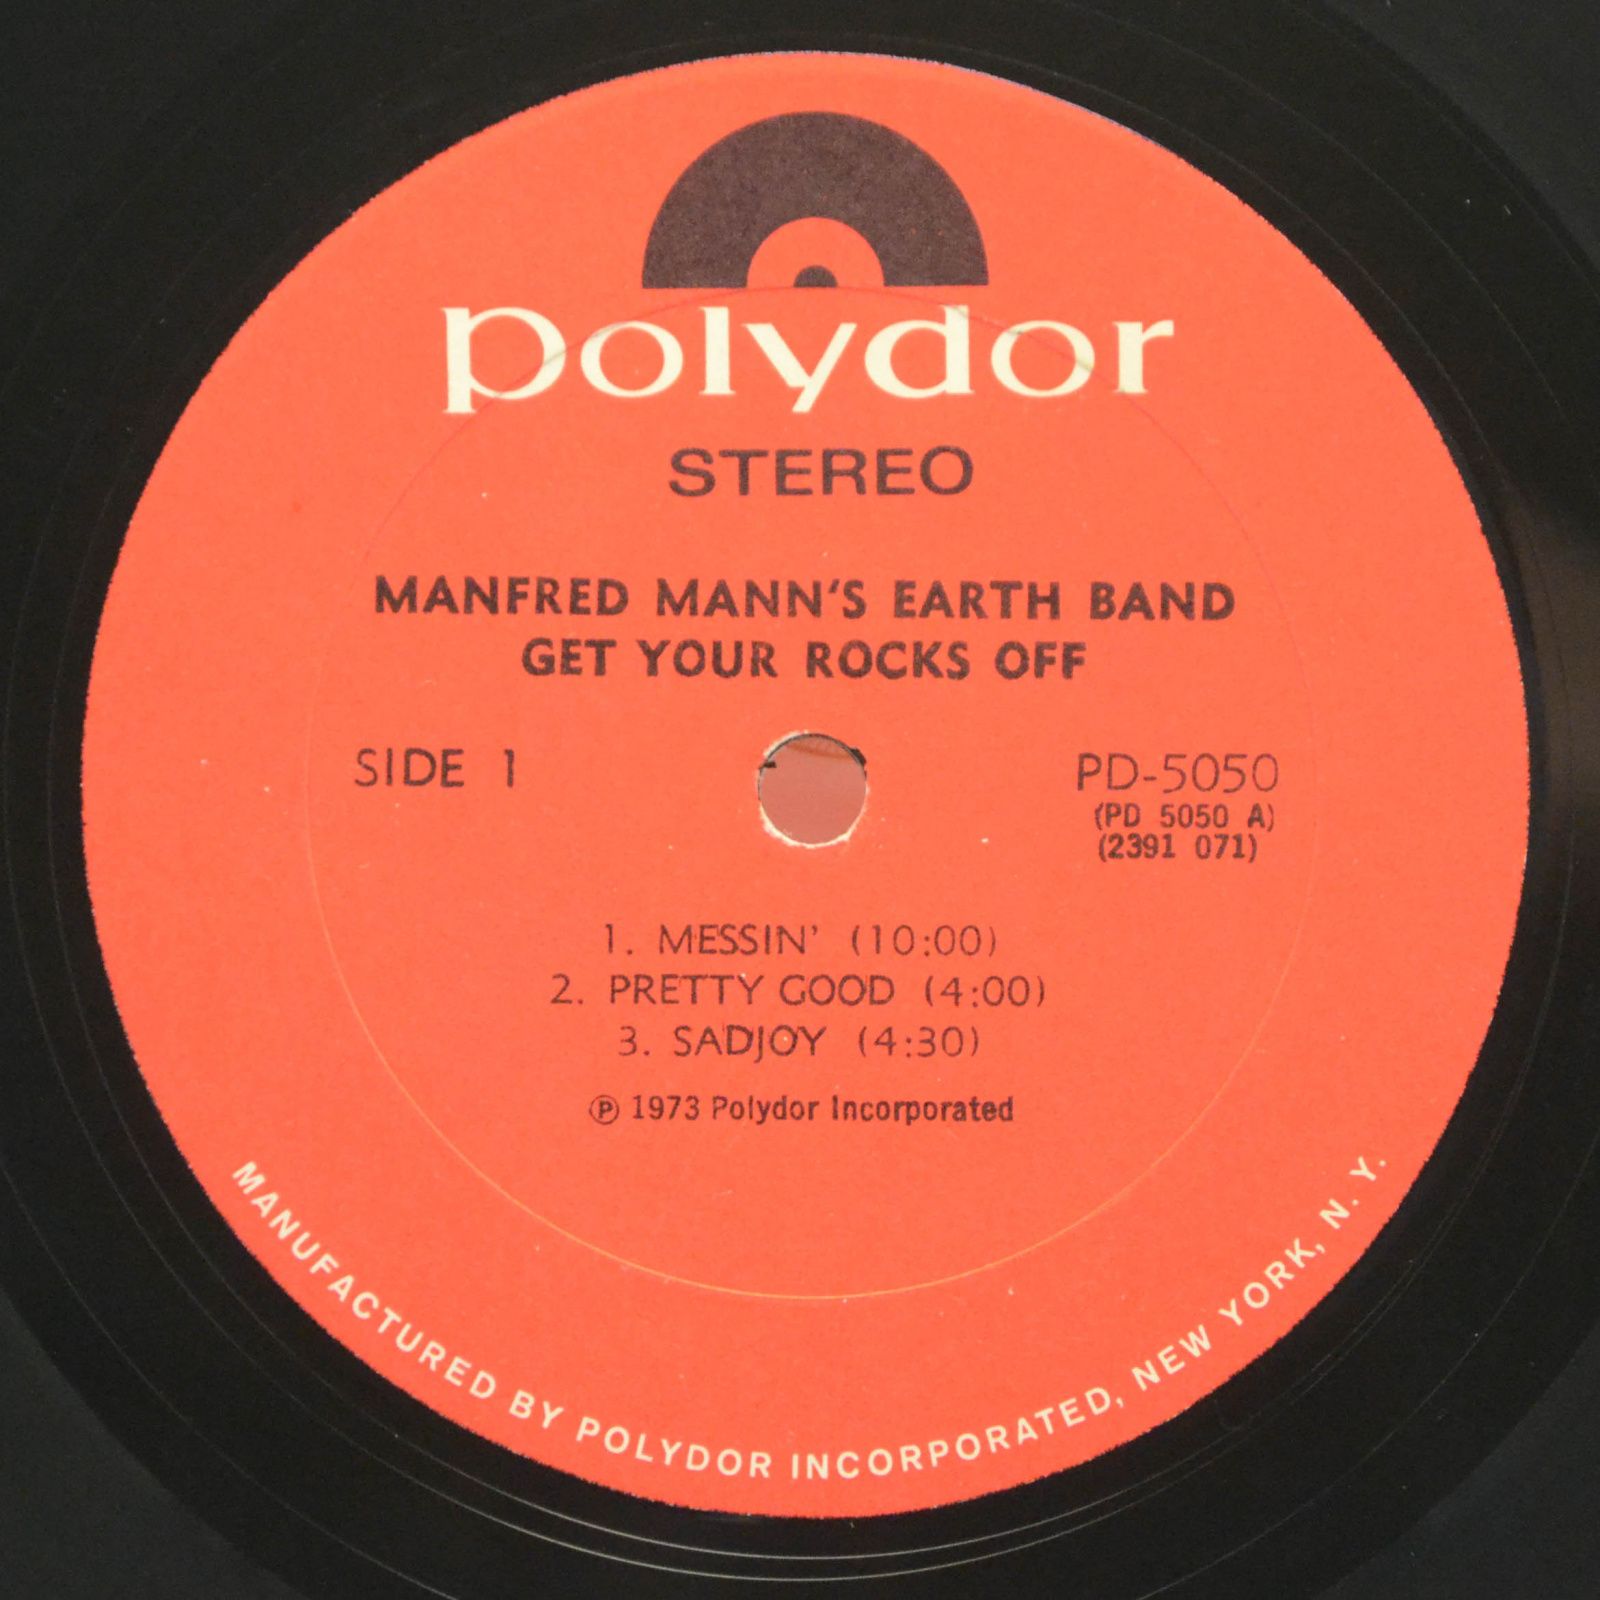 Manfred Mann's Earth Band — Get Your Rocks Off (USA), 1973